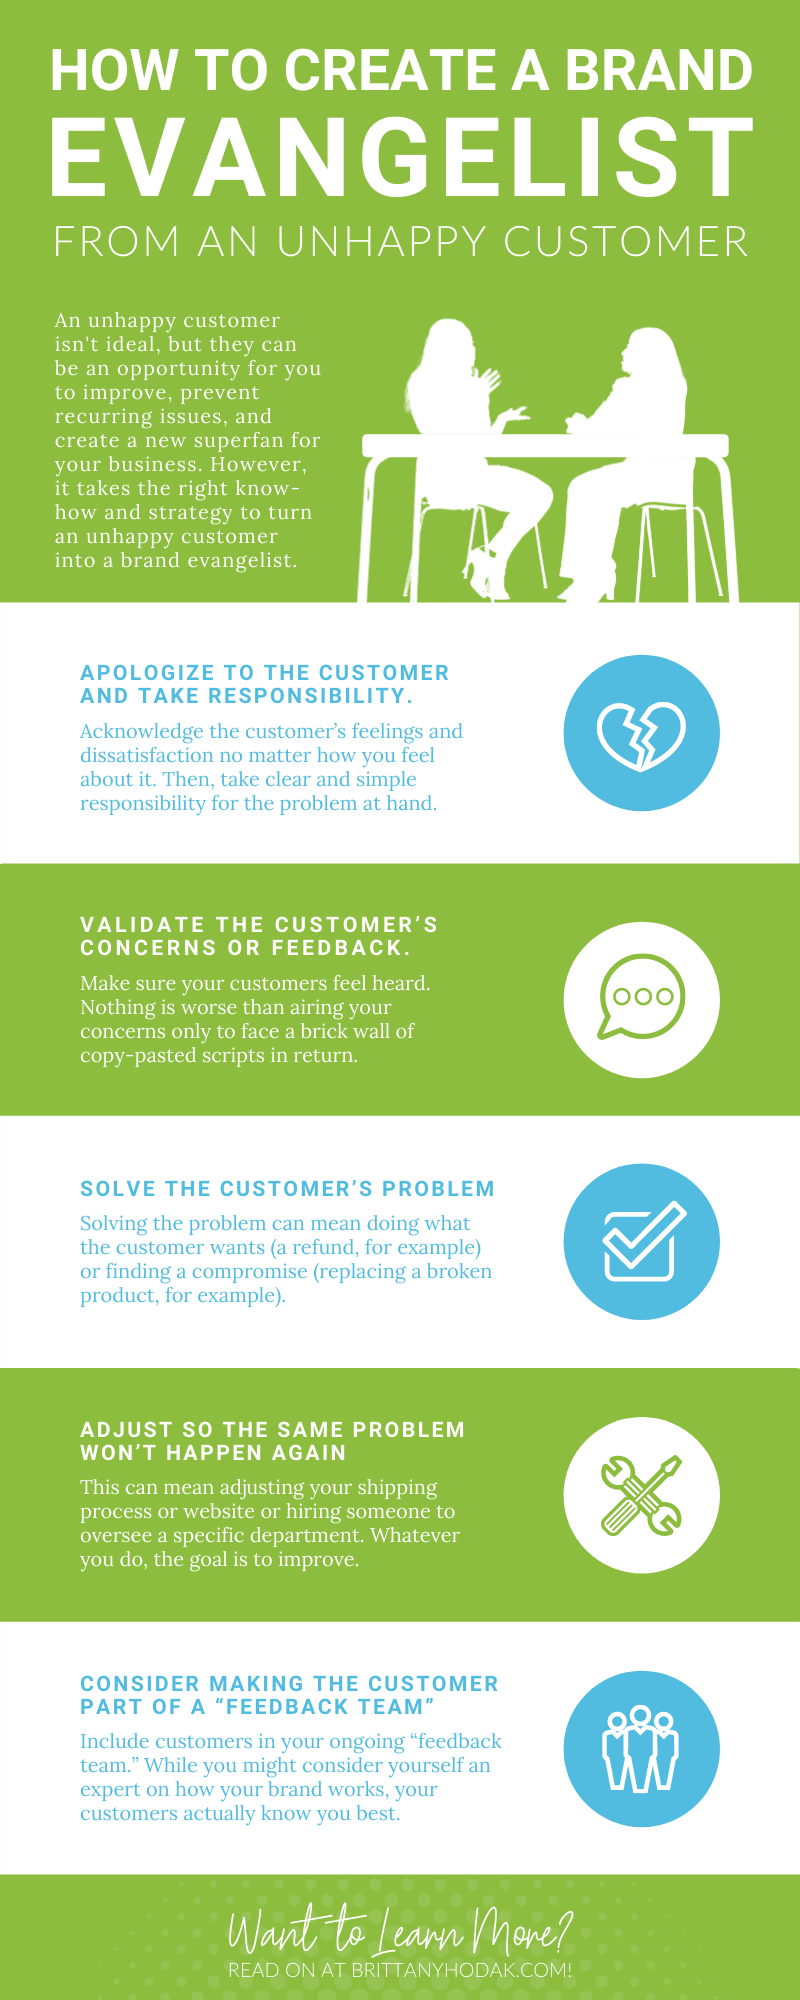 Infographic for How To Create A Brand Evangelist From An Unhappy Customer - Brittany Hodak